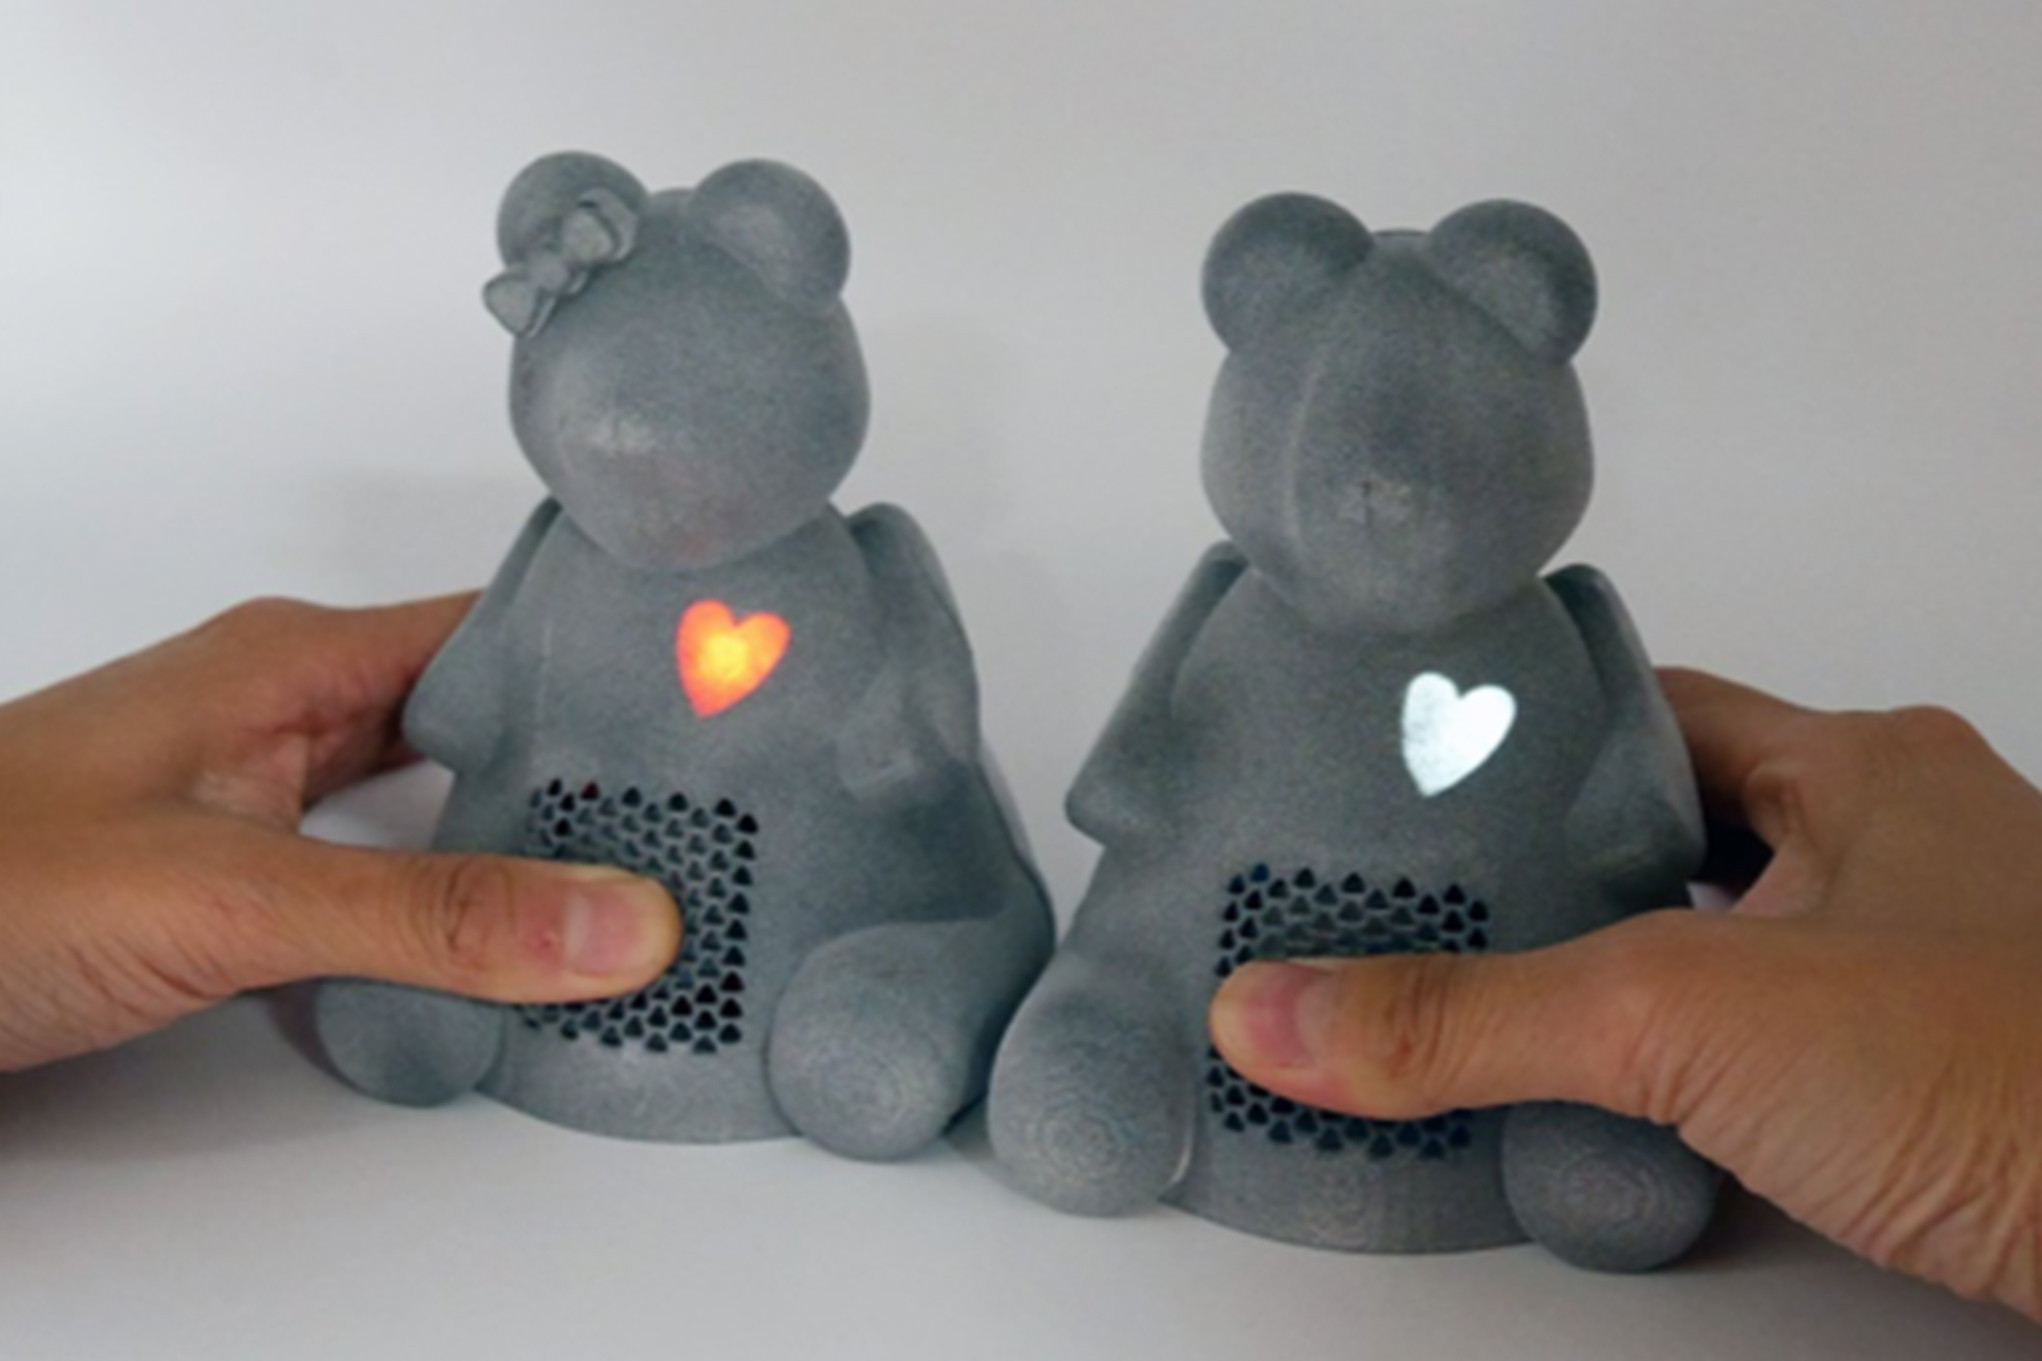 Two 3D printed bears with a soft belly. A finger is pressing on  one of them and a heart lights up from inside the bear.